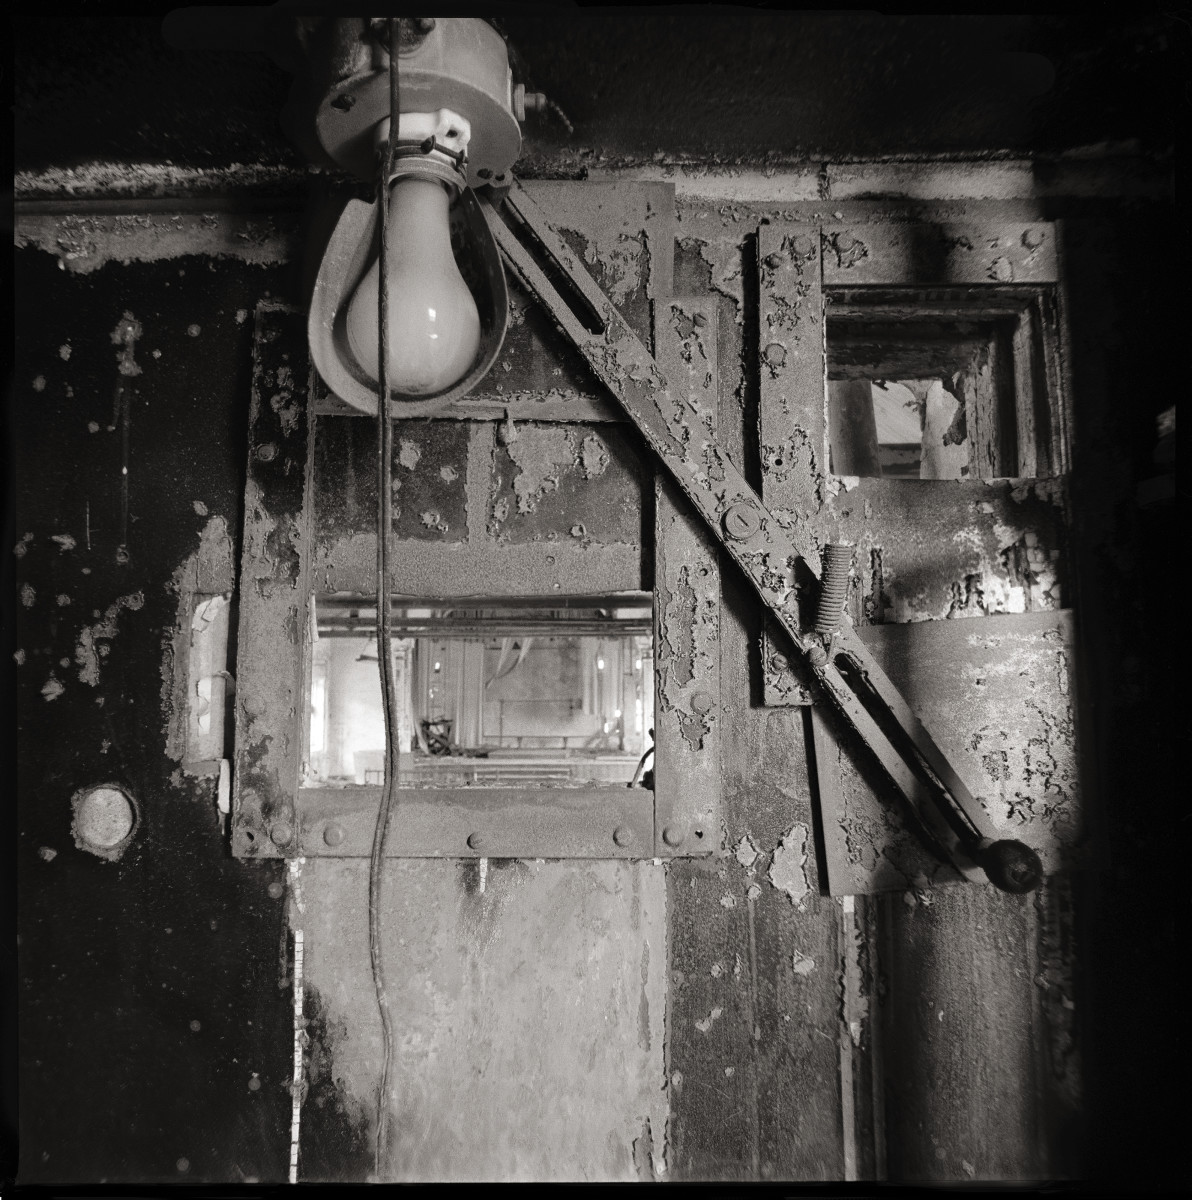 Projection Room by Eric T. Kunsman  Image: ID: A black and white image shows a lightbulb by a small glass window into the next room where projections were displayed.